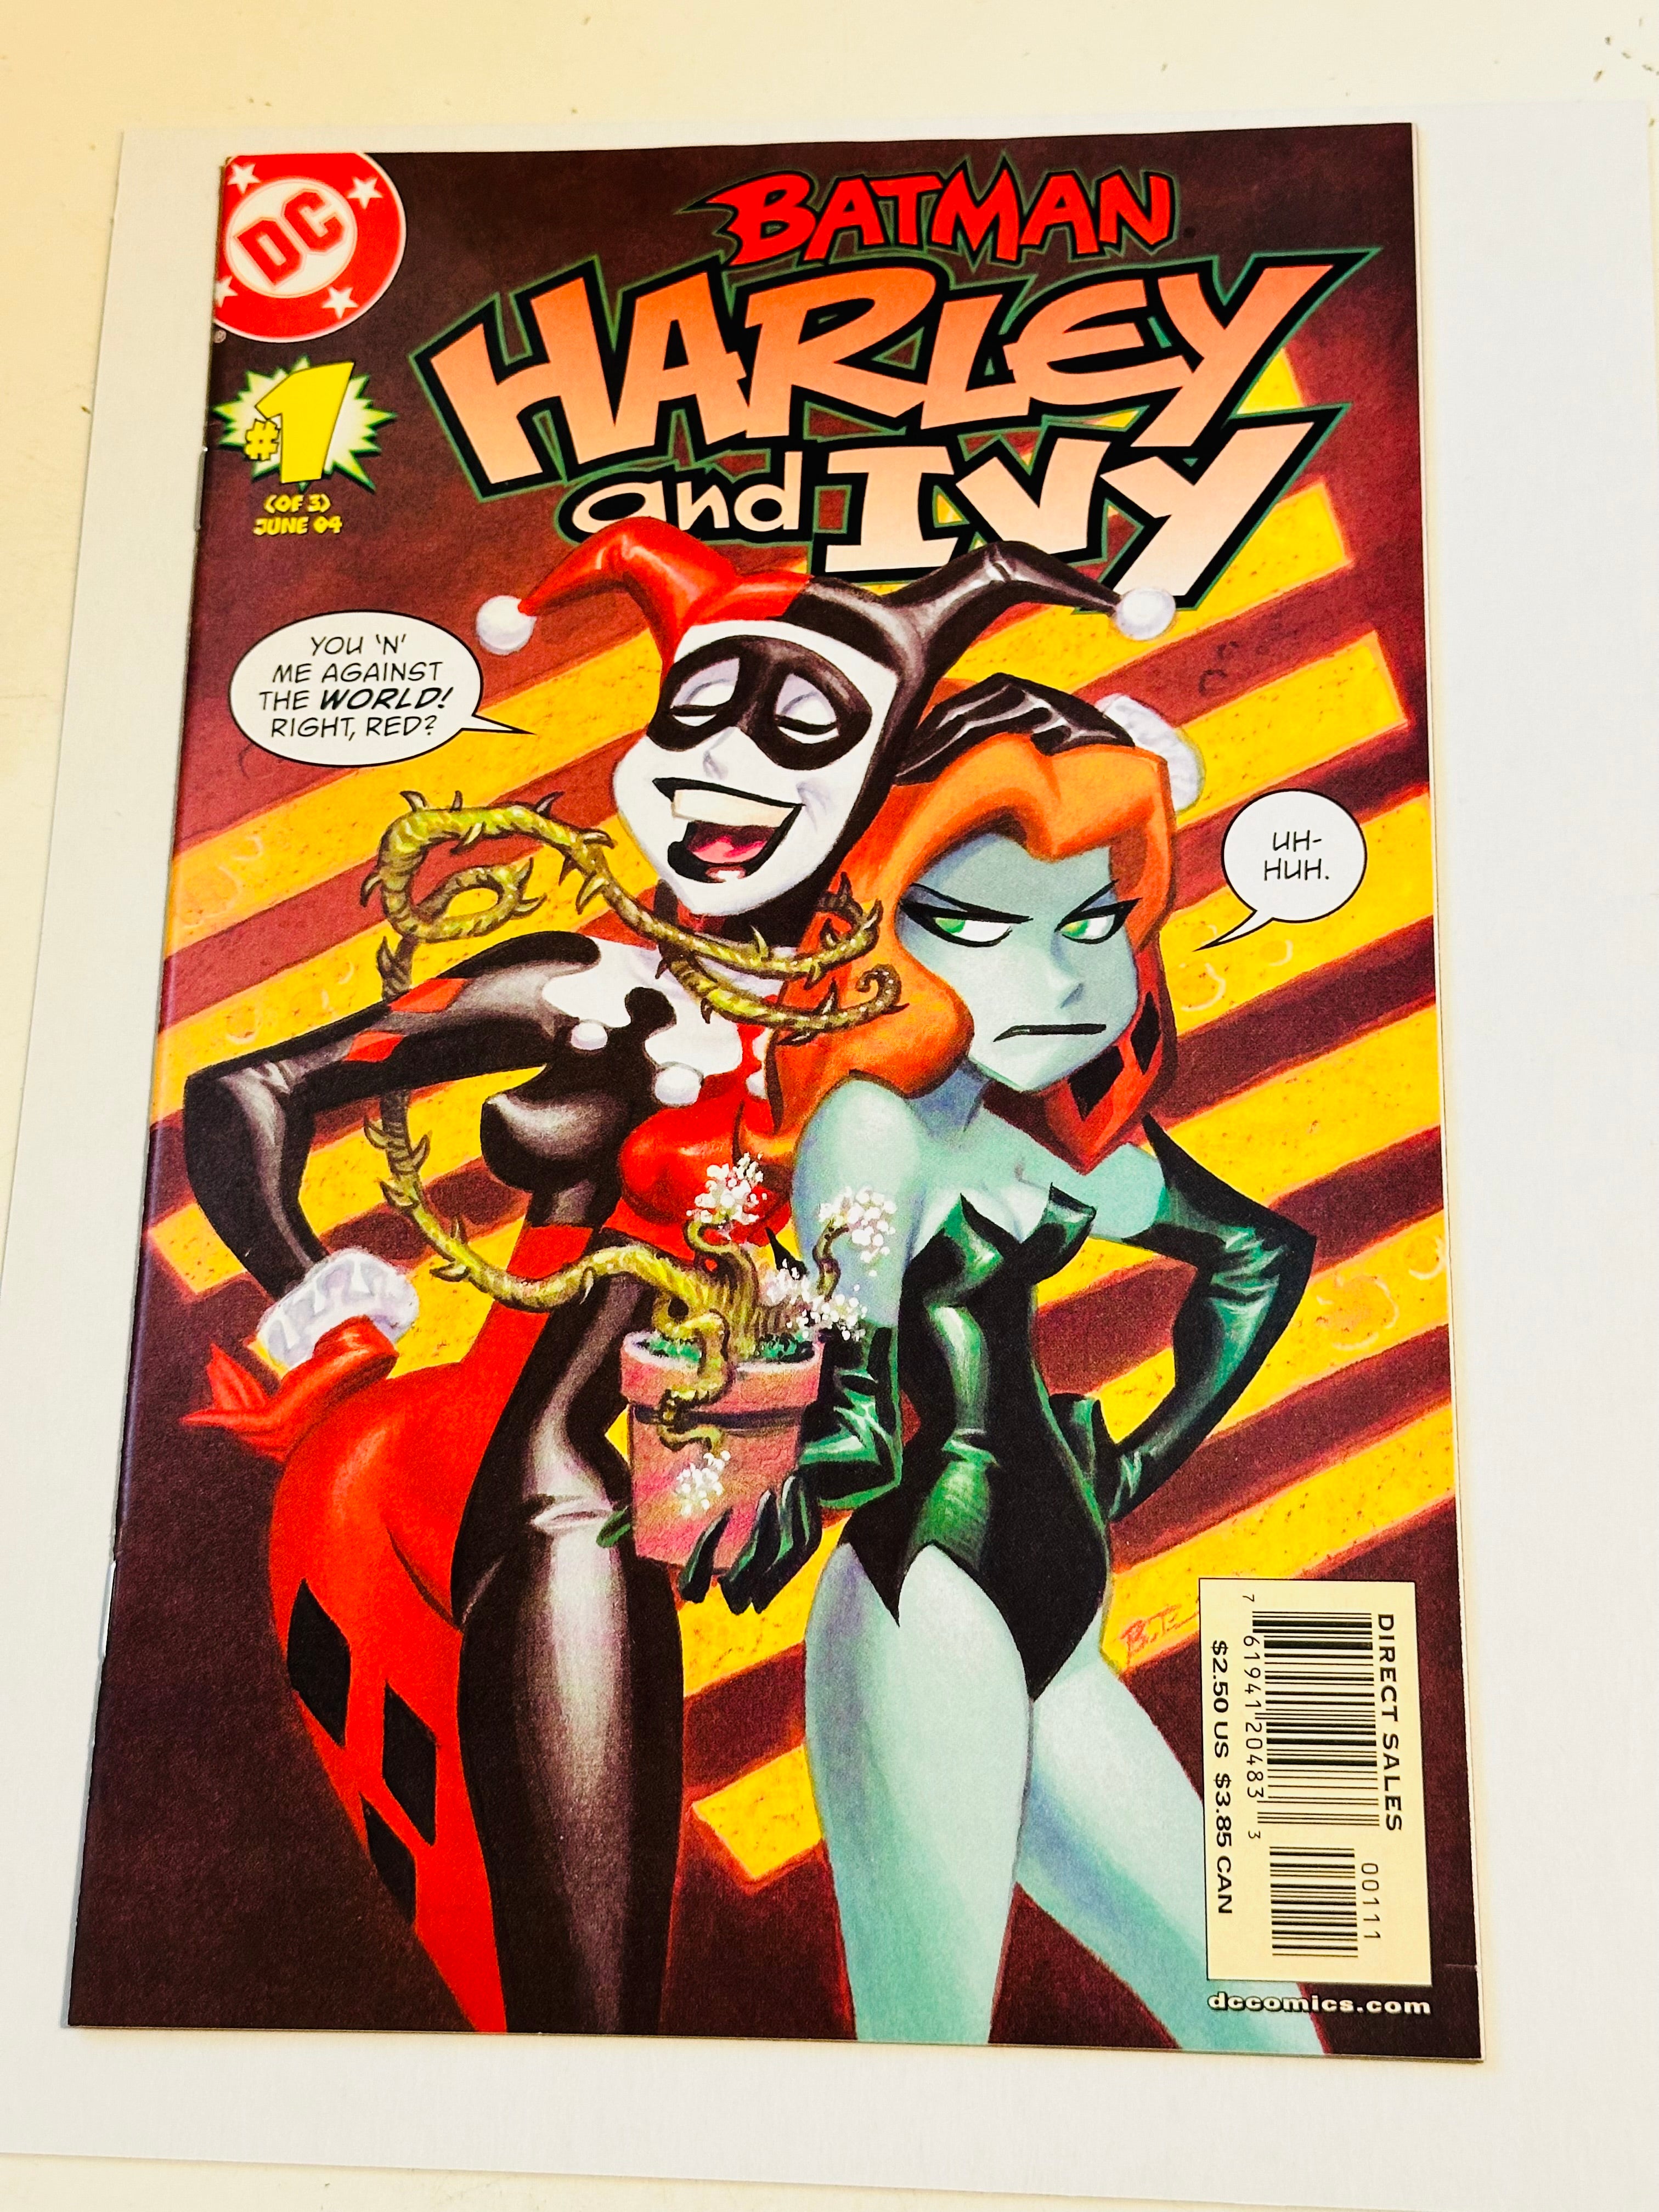 Batman: Harley and Ivy #1 Vf condition comic book 2004